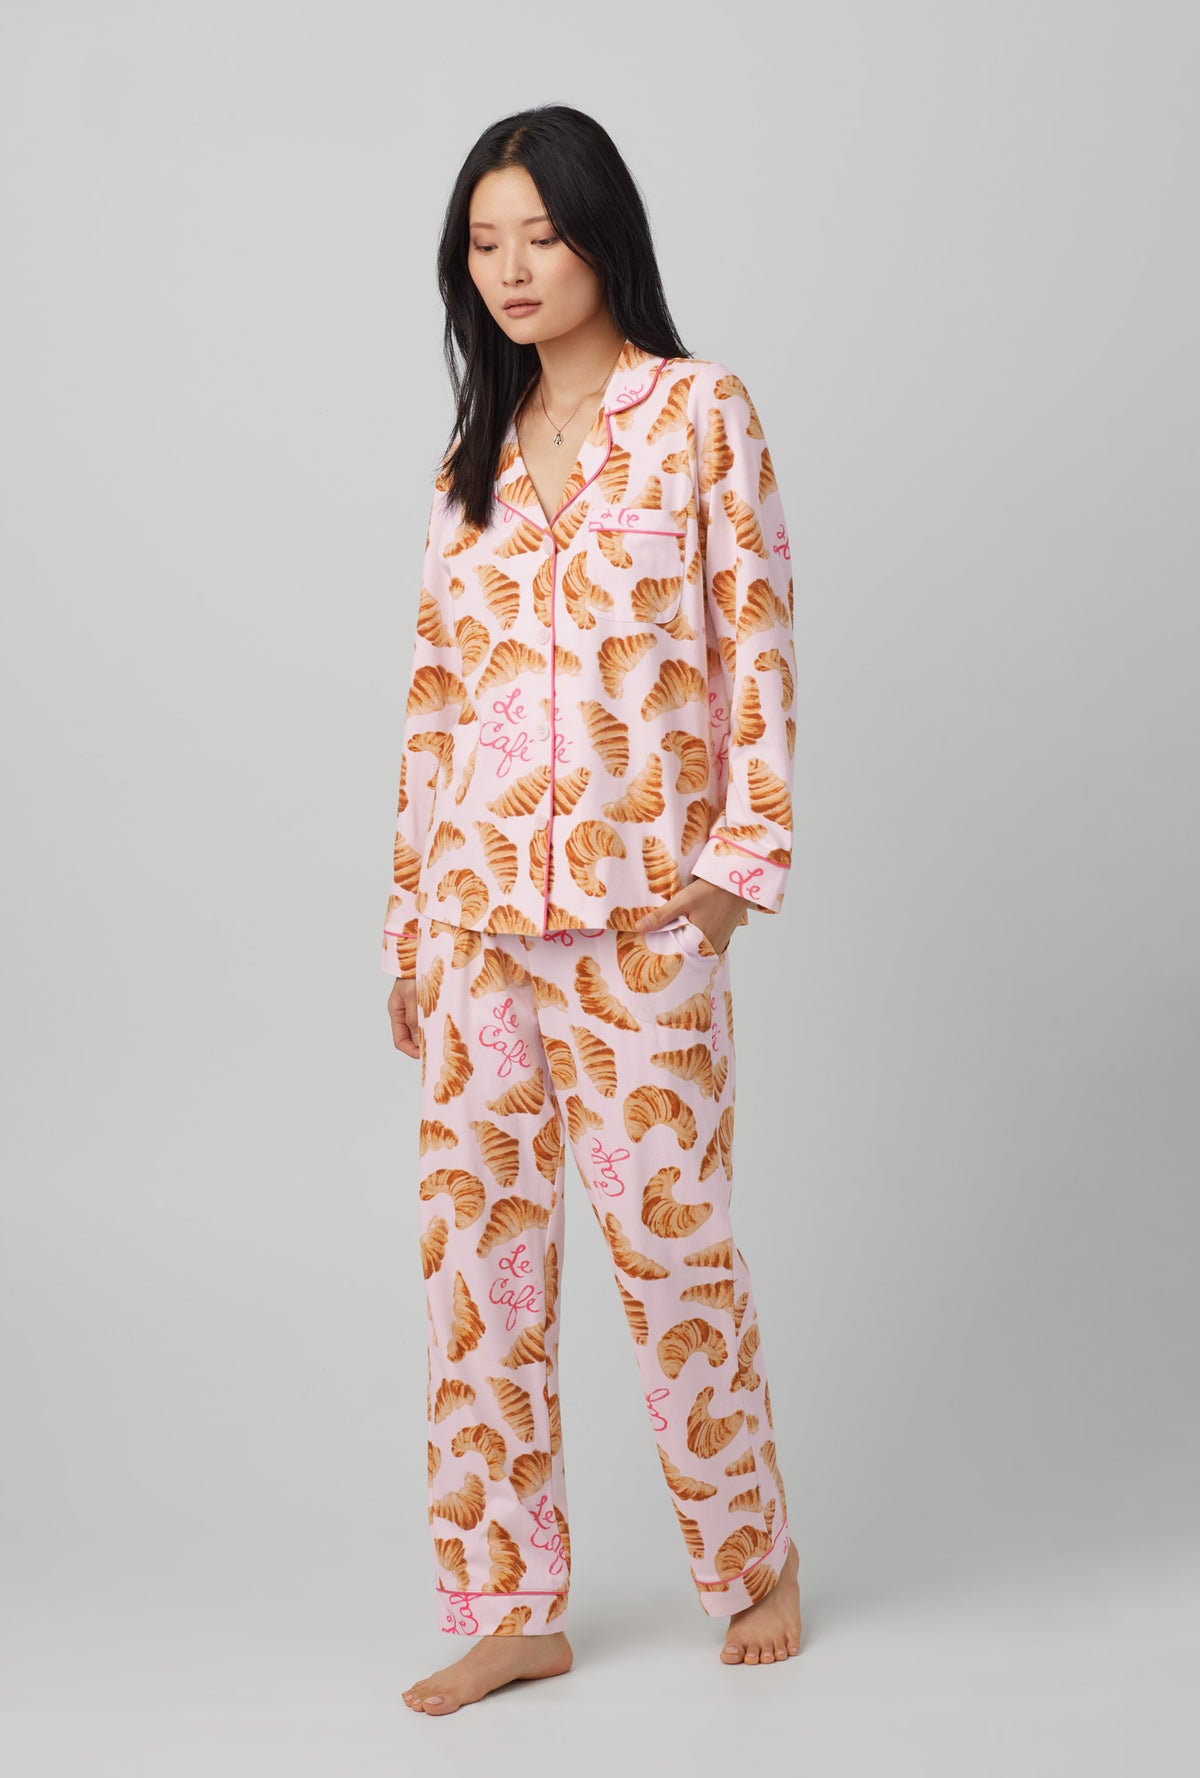 A lady wearing orange Long Sleeve Classic Stretch Jersey PJ Set with Le Cafe  print.